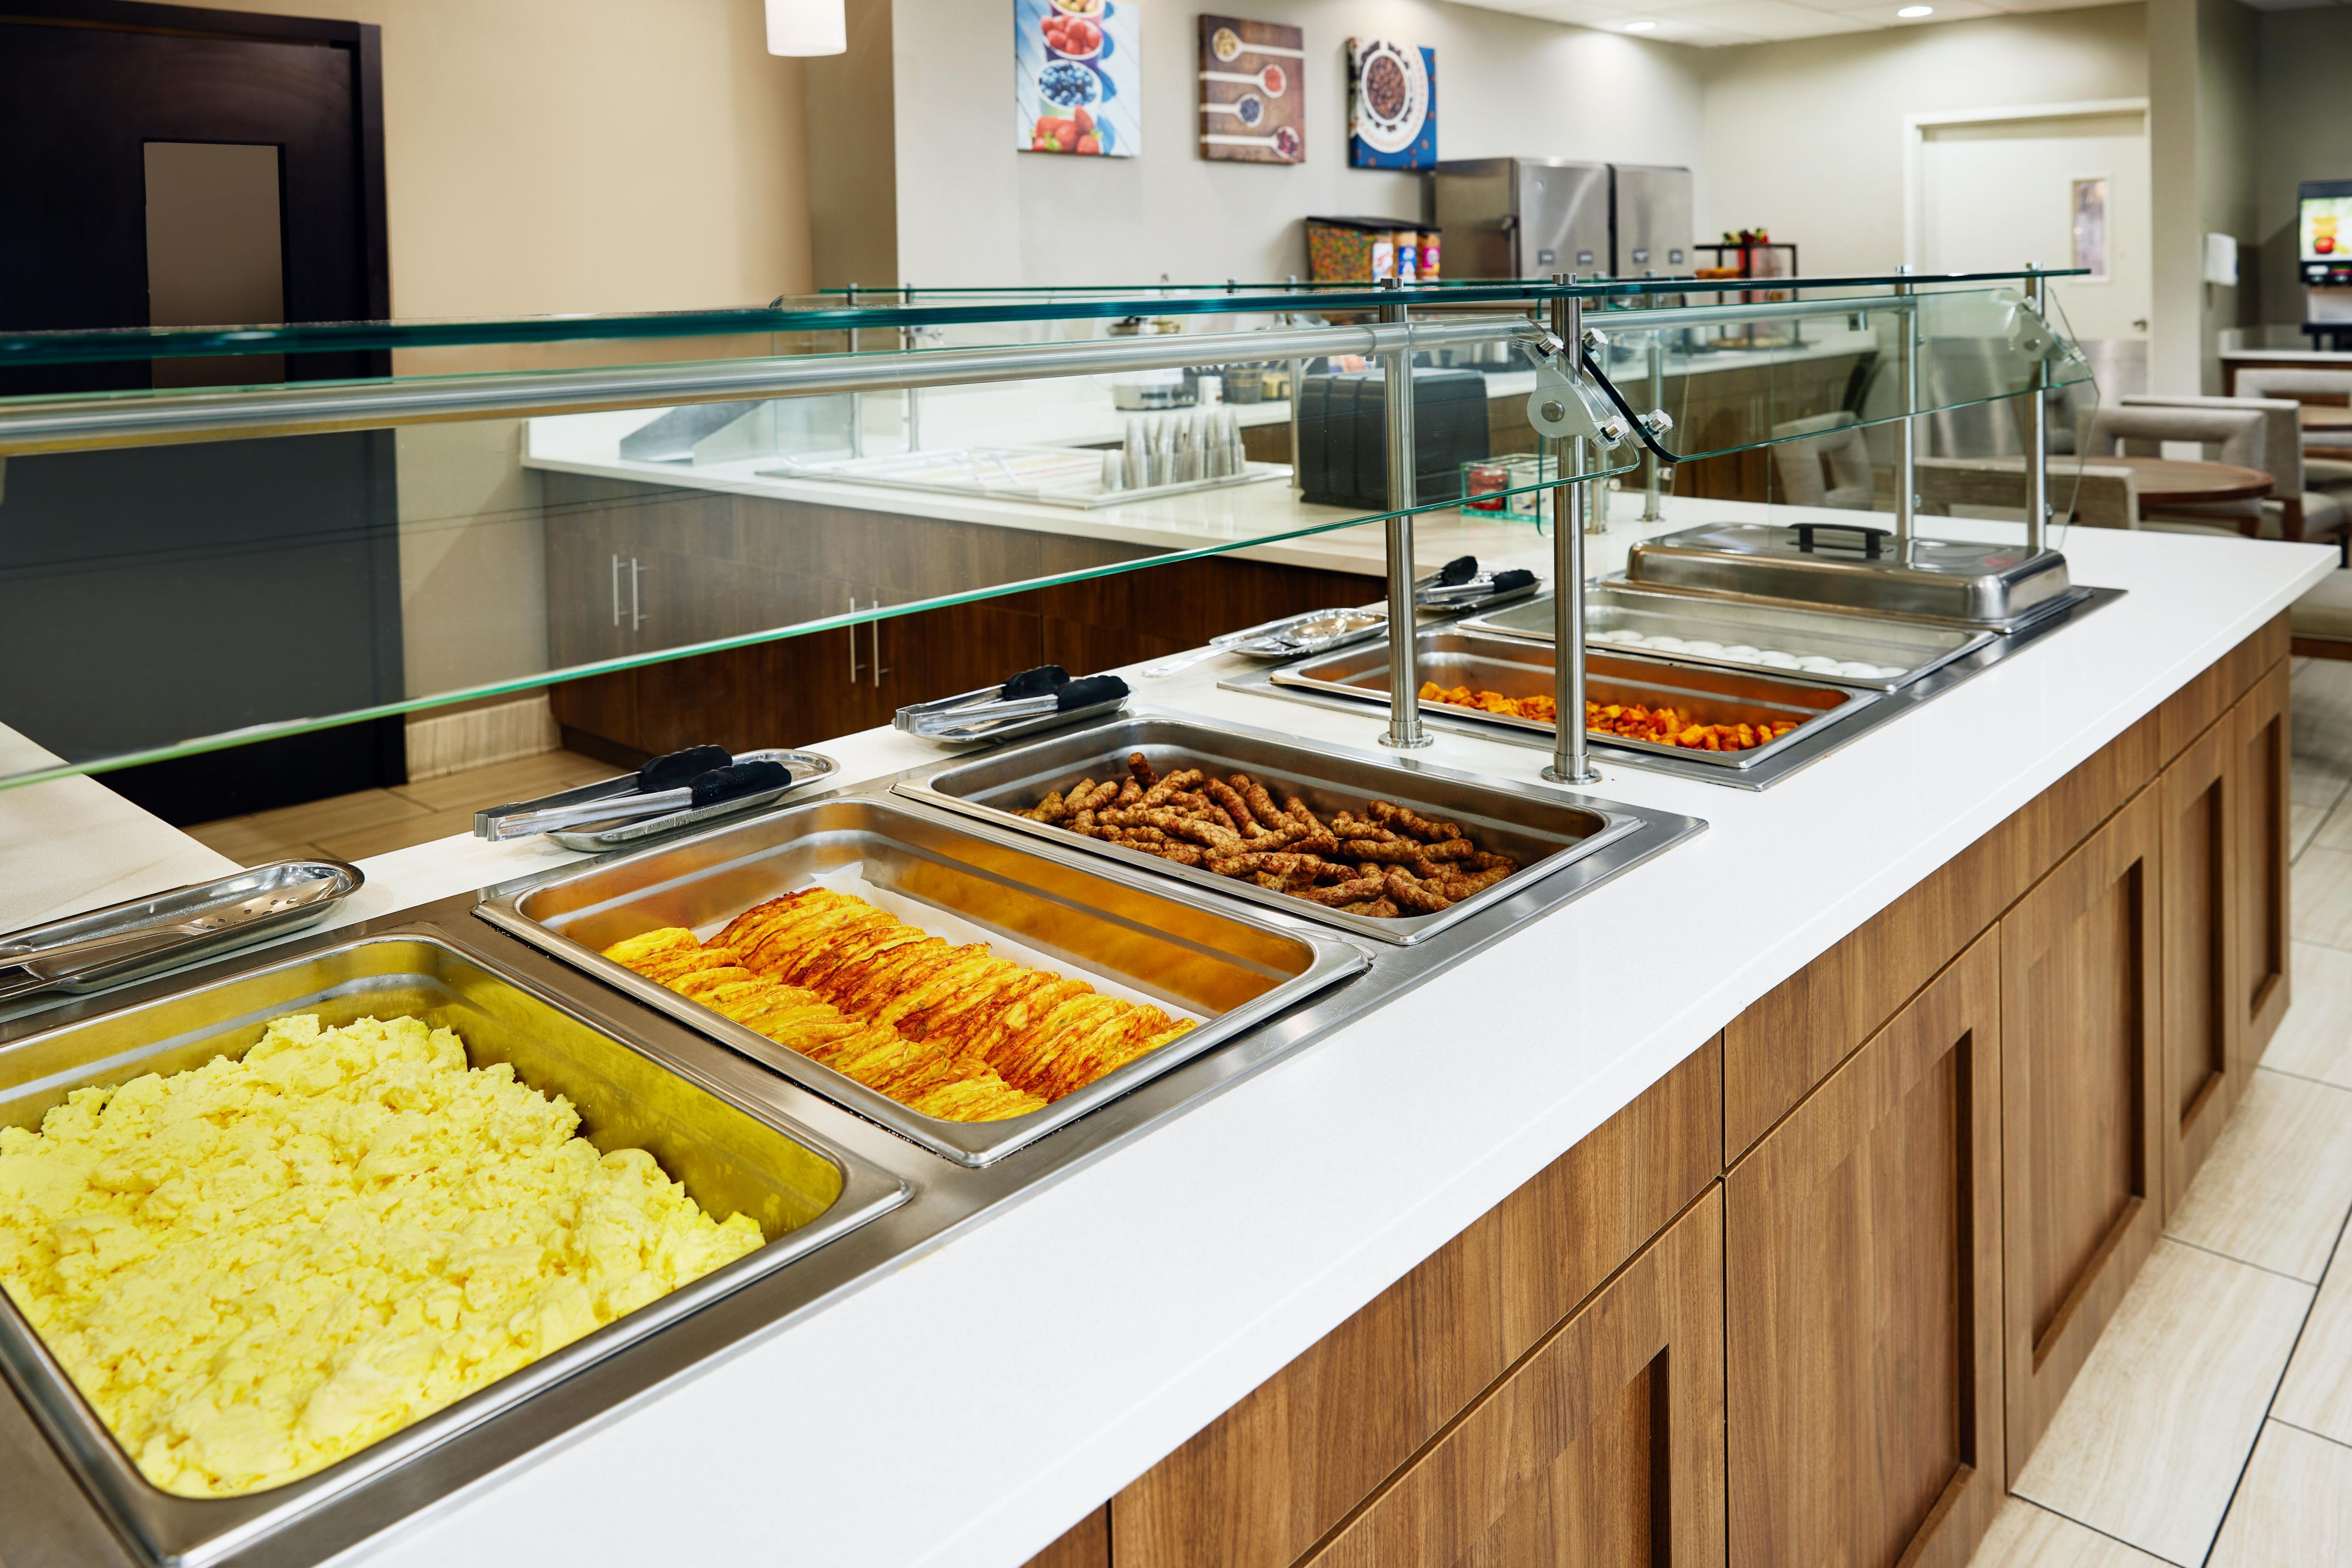 Begin your day with our famous complimentary hot breakfast buffet before you head out for your Orlando adventure. Enjoy all your morning favorites, including a selection of eggs, breakfast meat, breakfast potatoes, pastries, bagels, toast, cereals, oatmeal, yogurt bar, as well as coffee and juices.